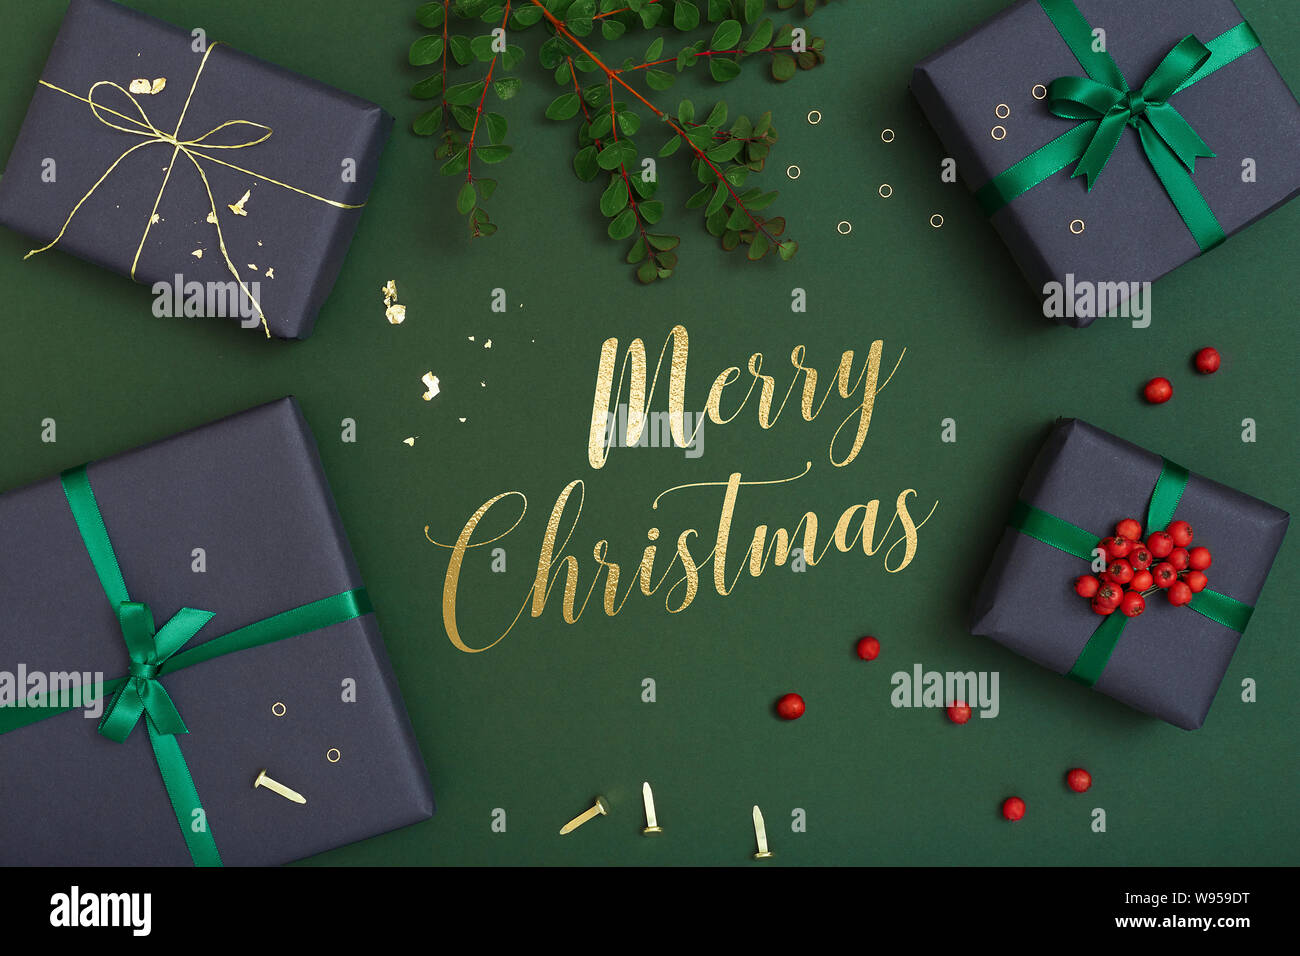 Merry Christmas text and Christmas gifts on green background, presents flat lay with Christmas greetings Stock Photo